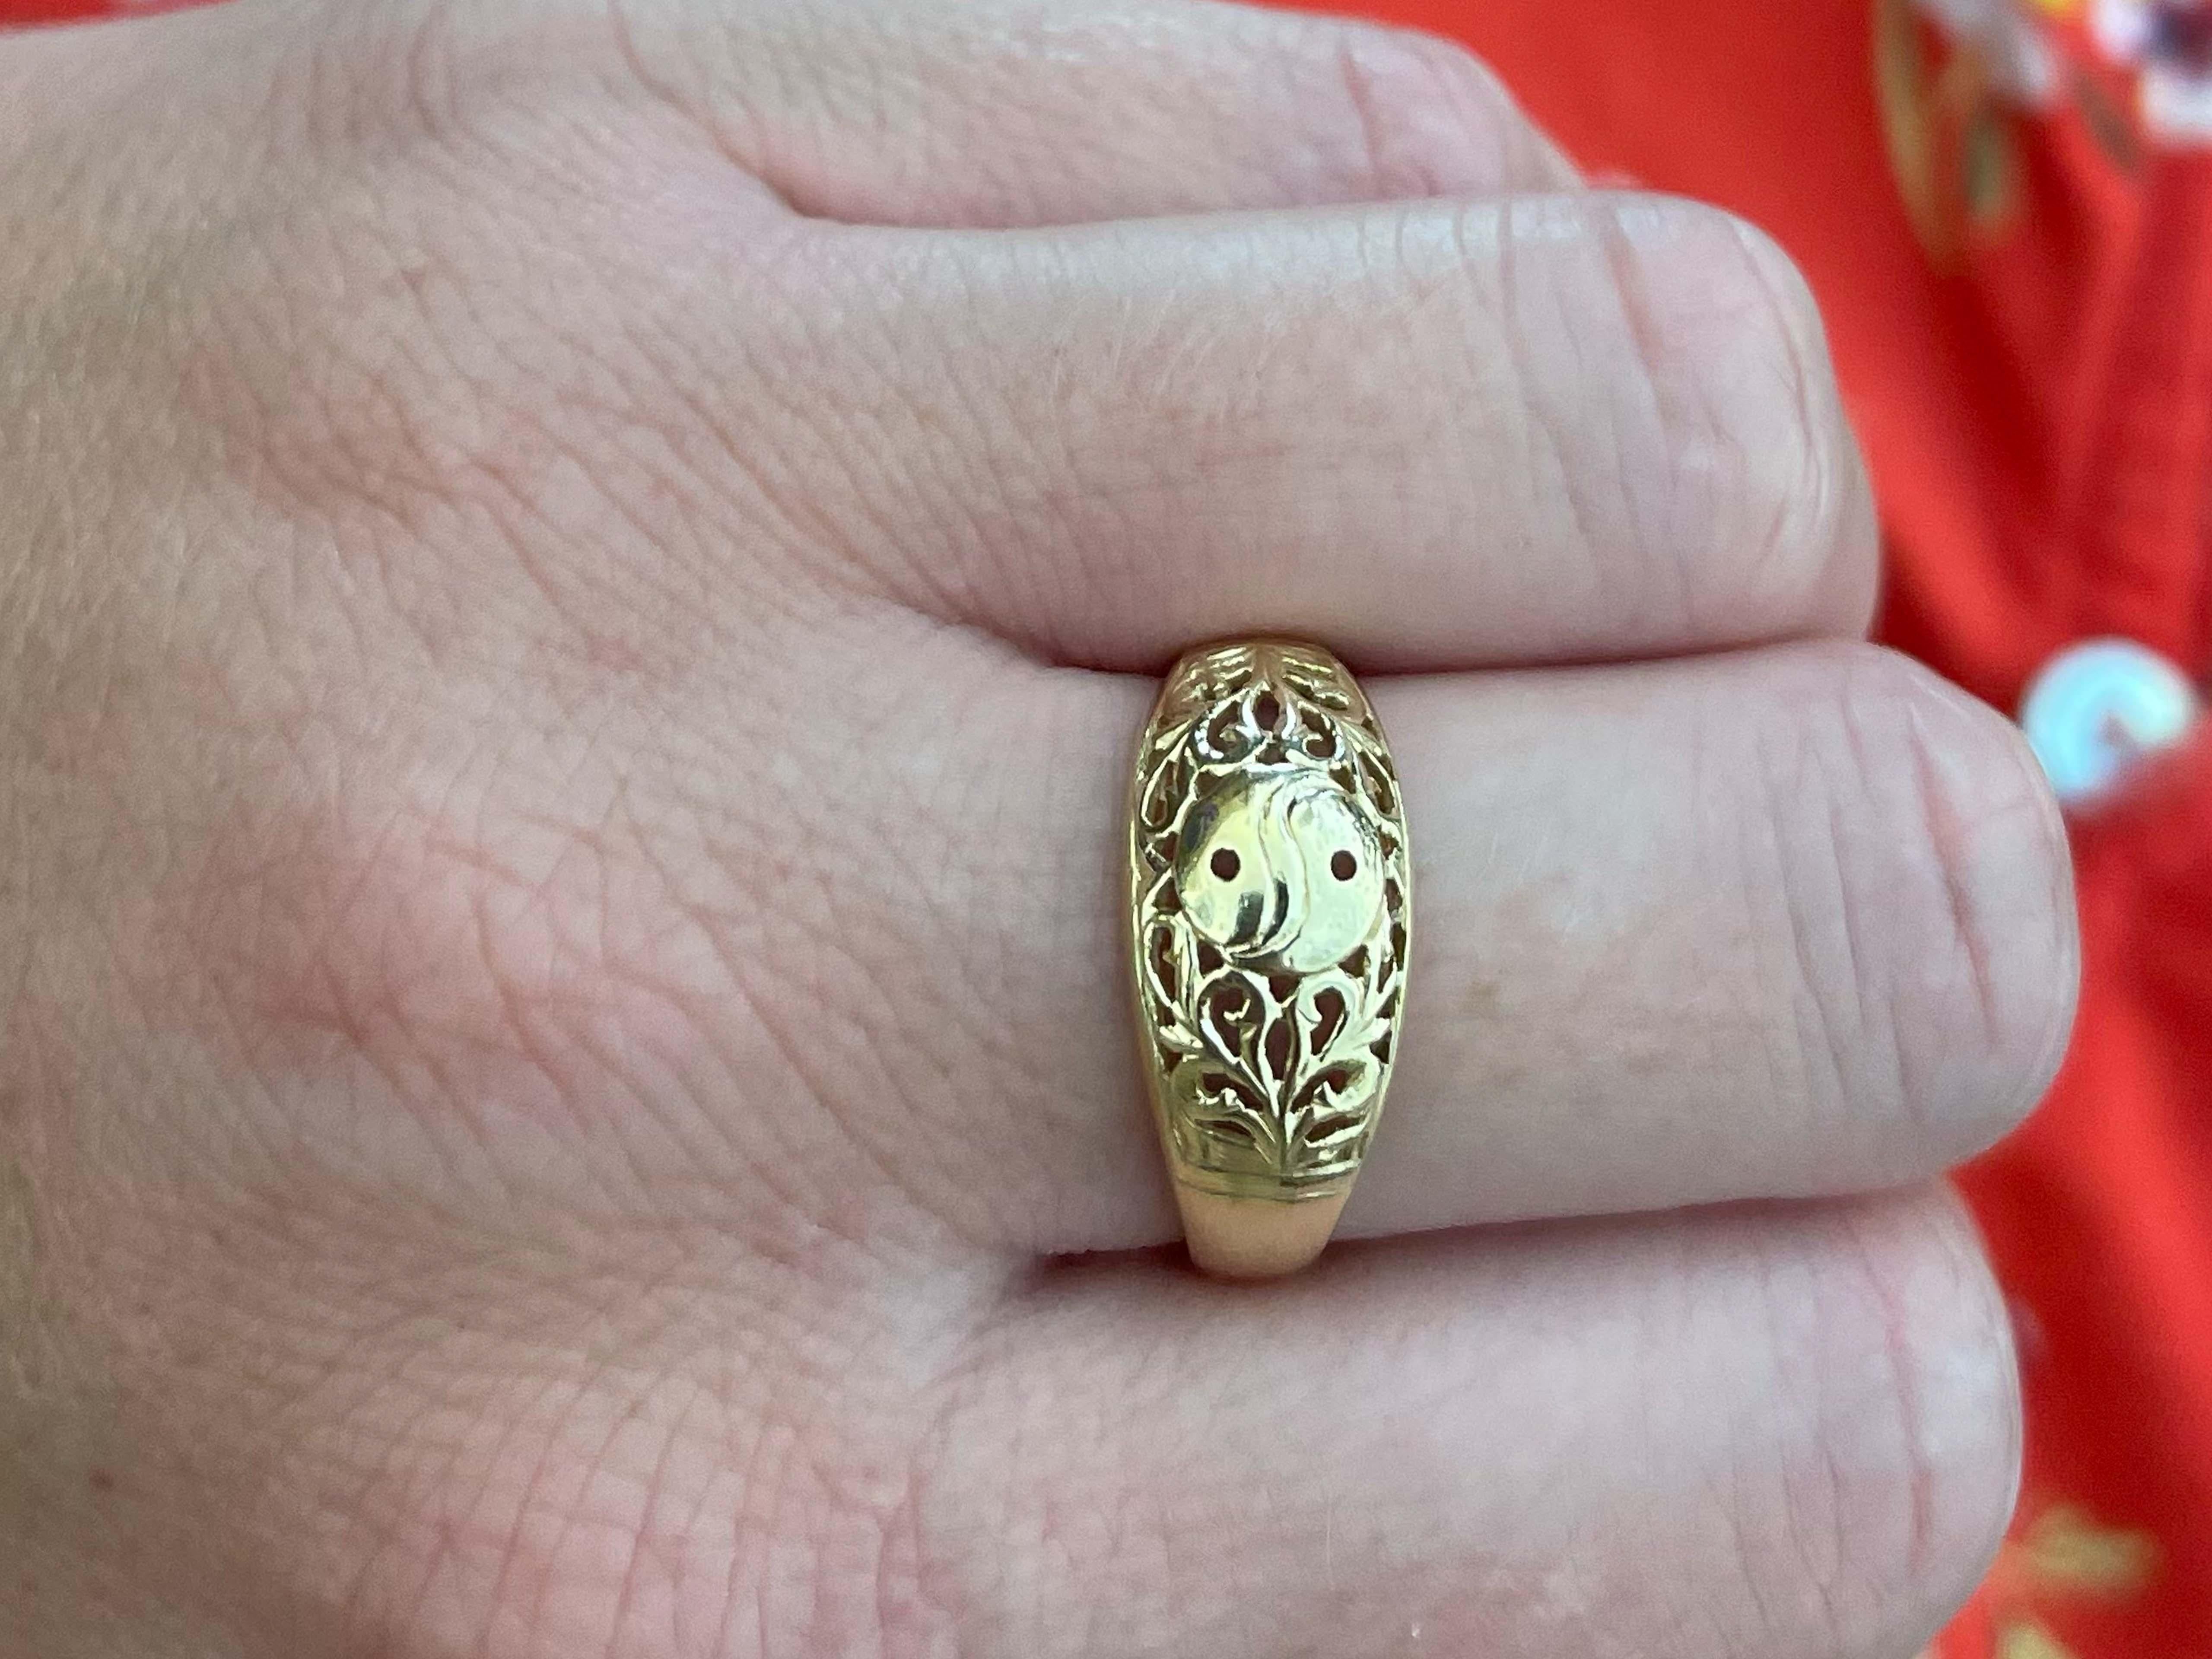 Ring Specifications:

Designer: Ming's

Metal: 14k Yellow Gold

Total Weight: 3.0 Grams

Ring Size: 8.5 (resizable)

Stamped: 